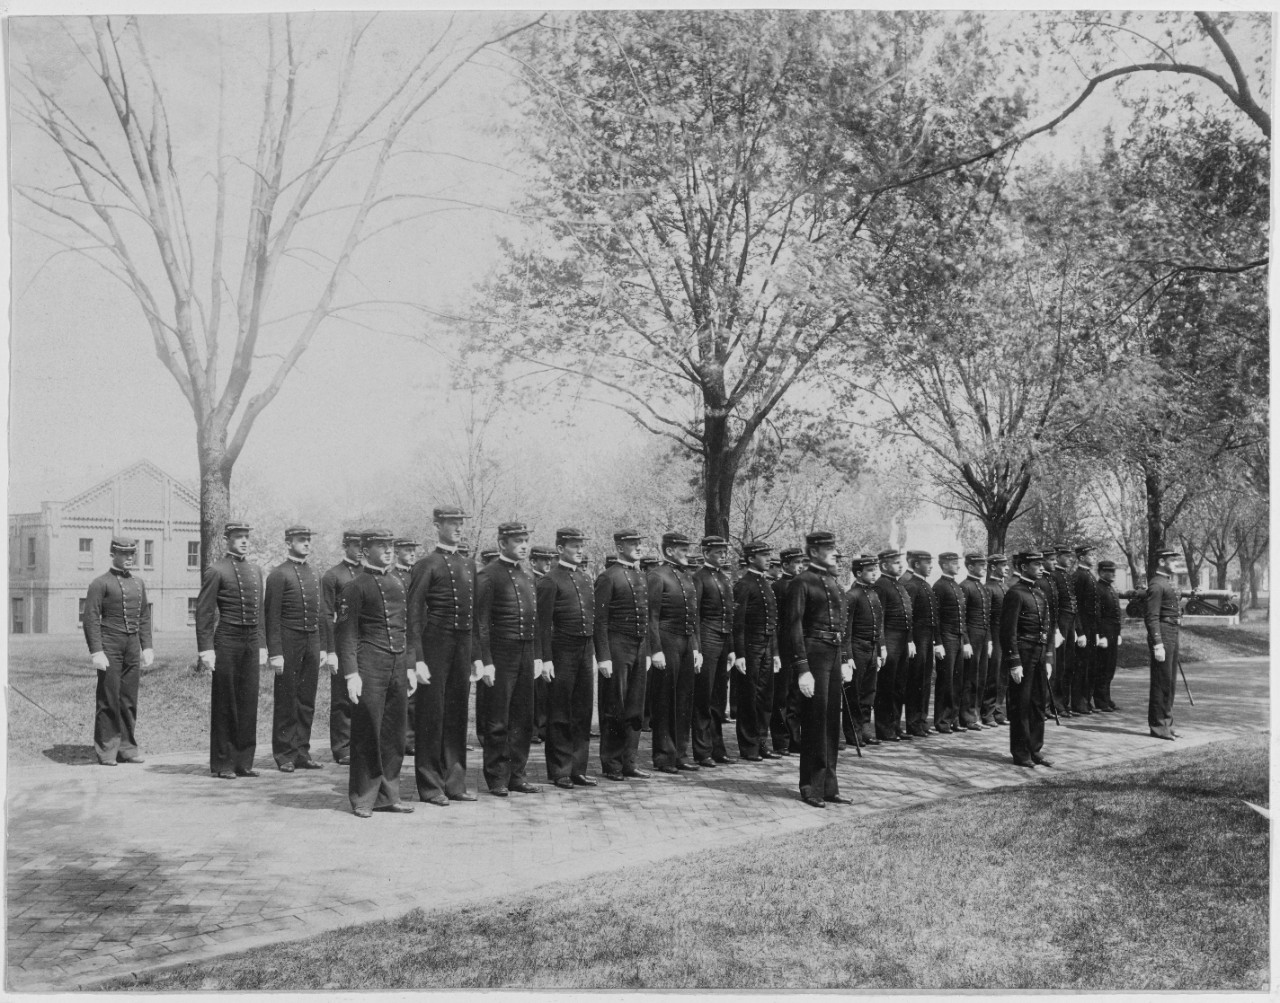 Cadets lined up for inspection, Annapolis MD.